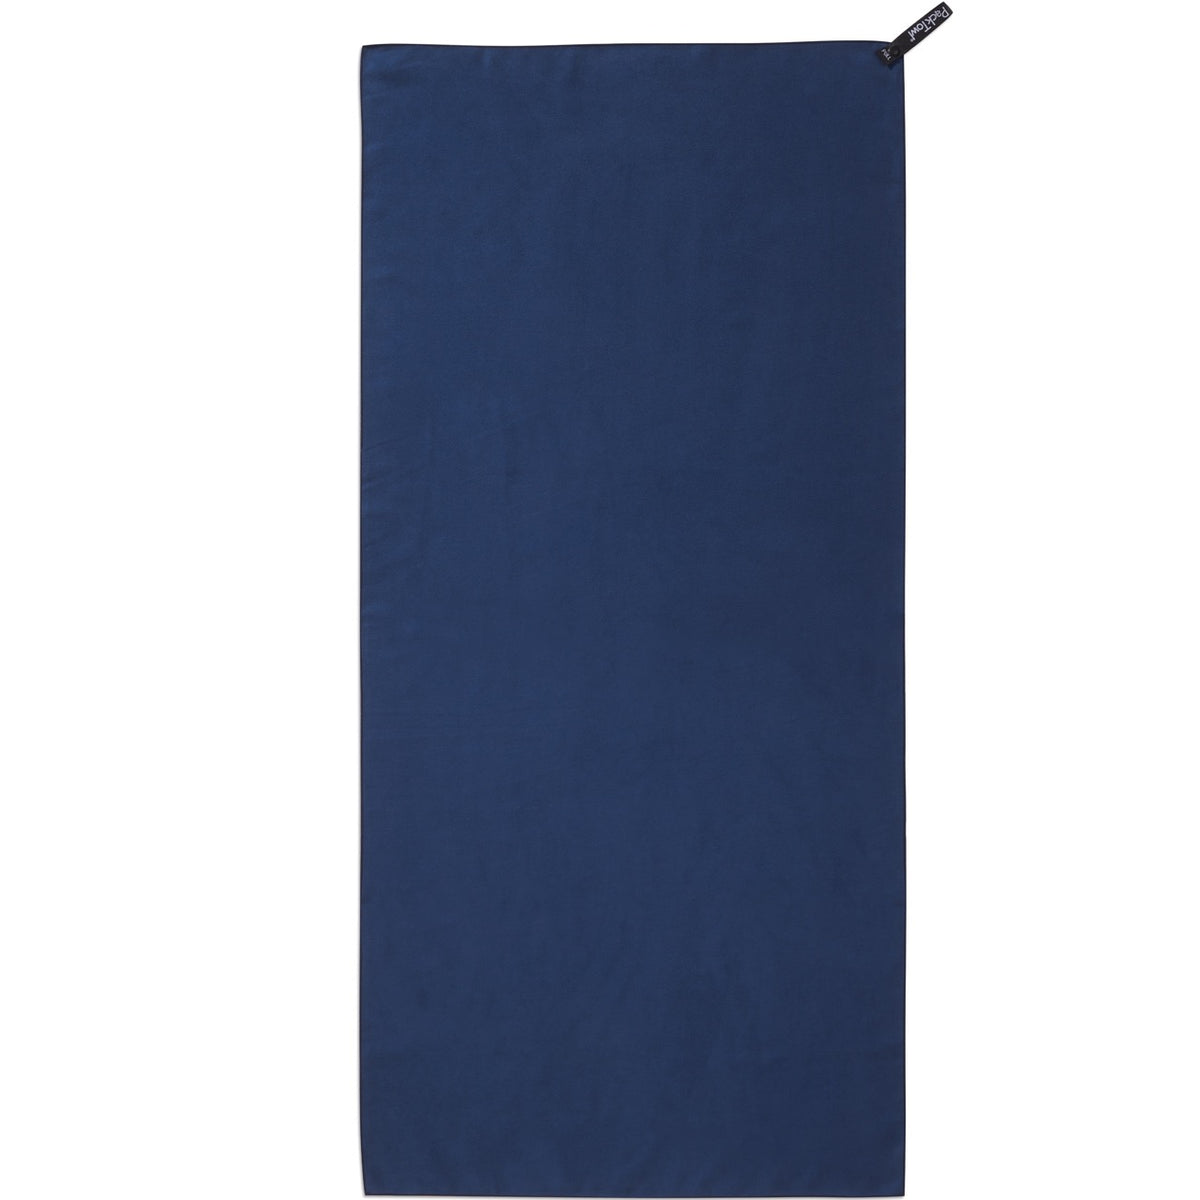 Packtowl Personal Towel - Hand size in midnight colour